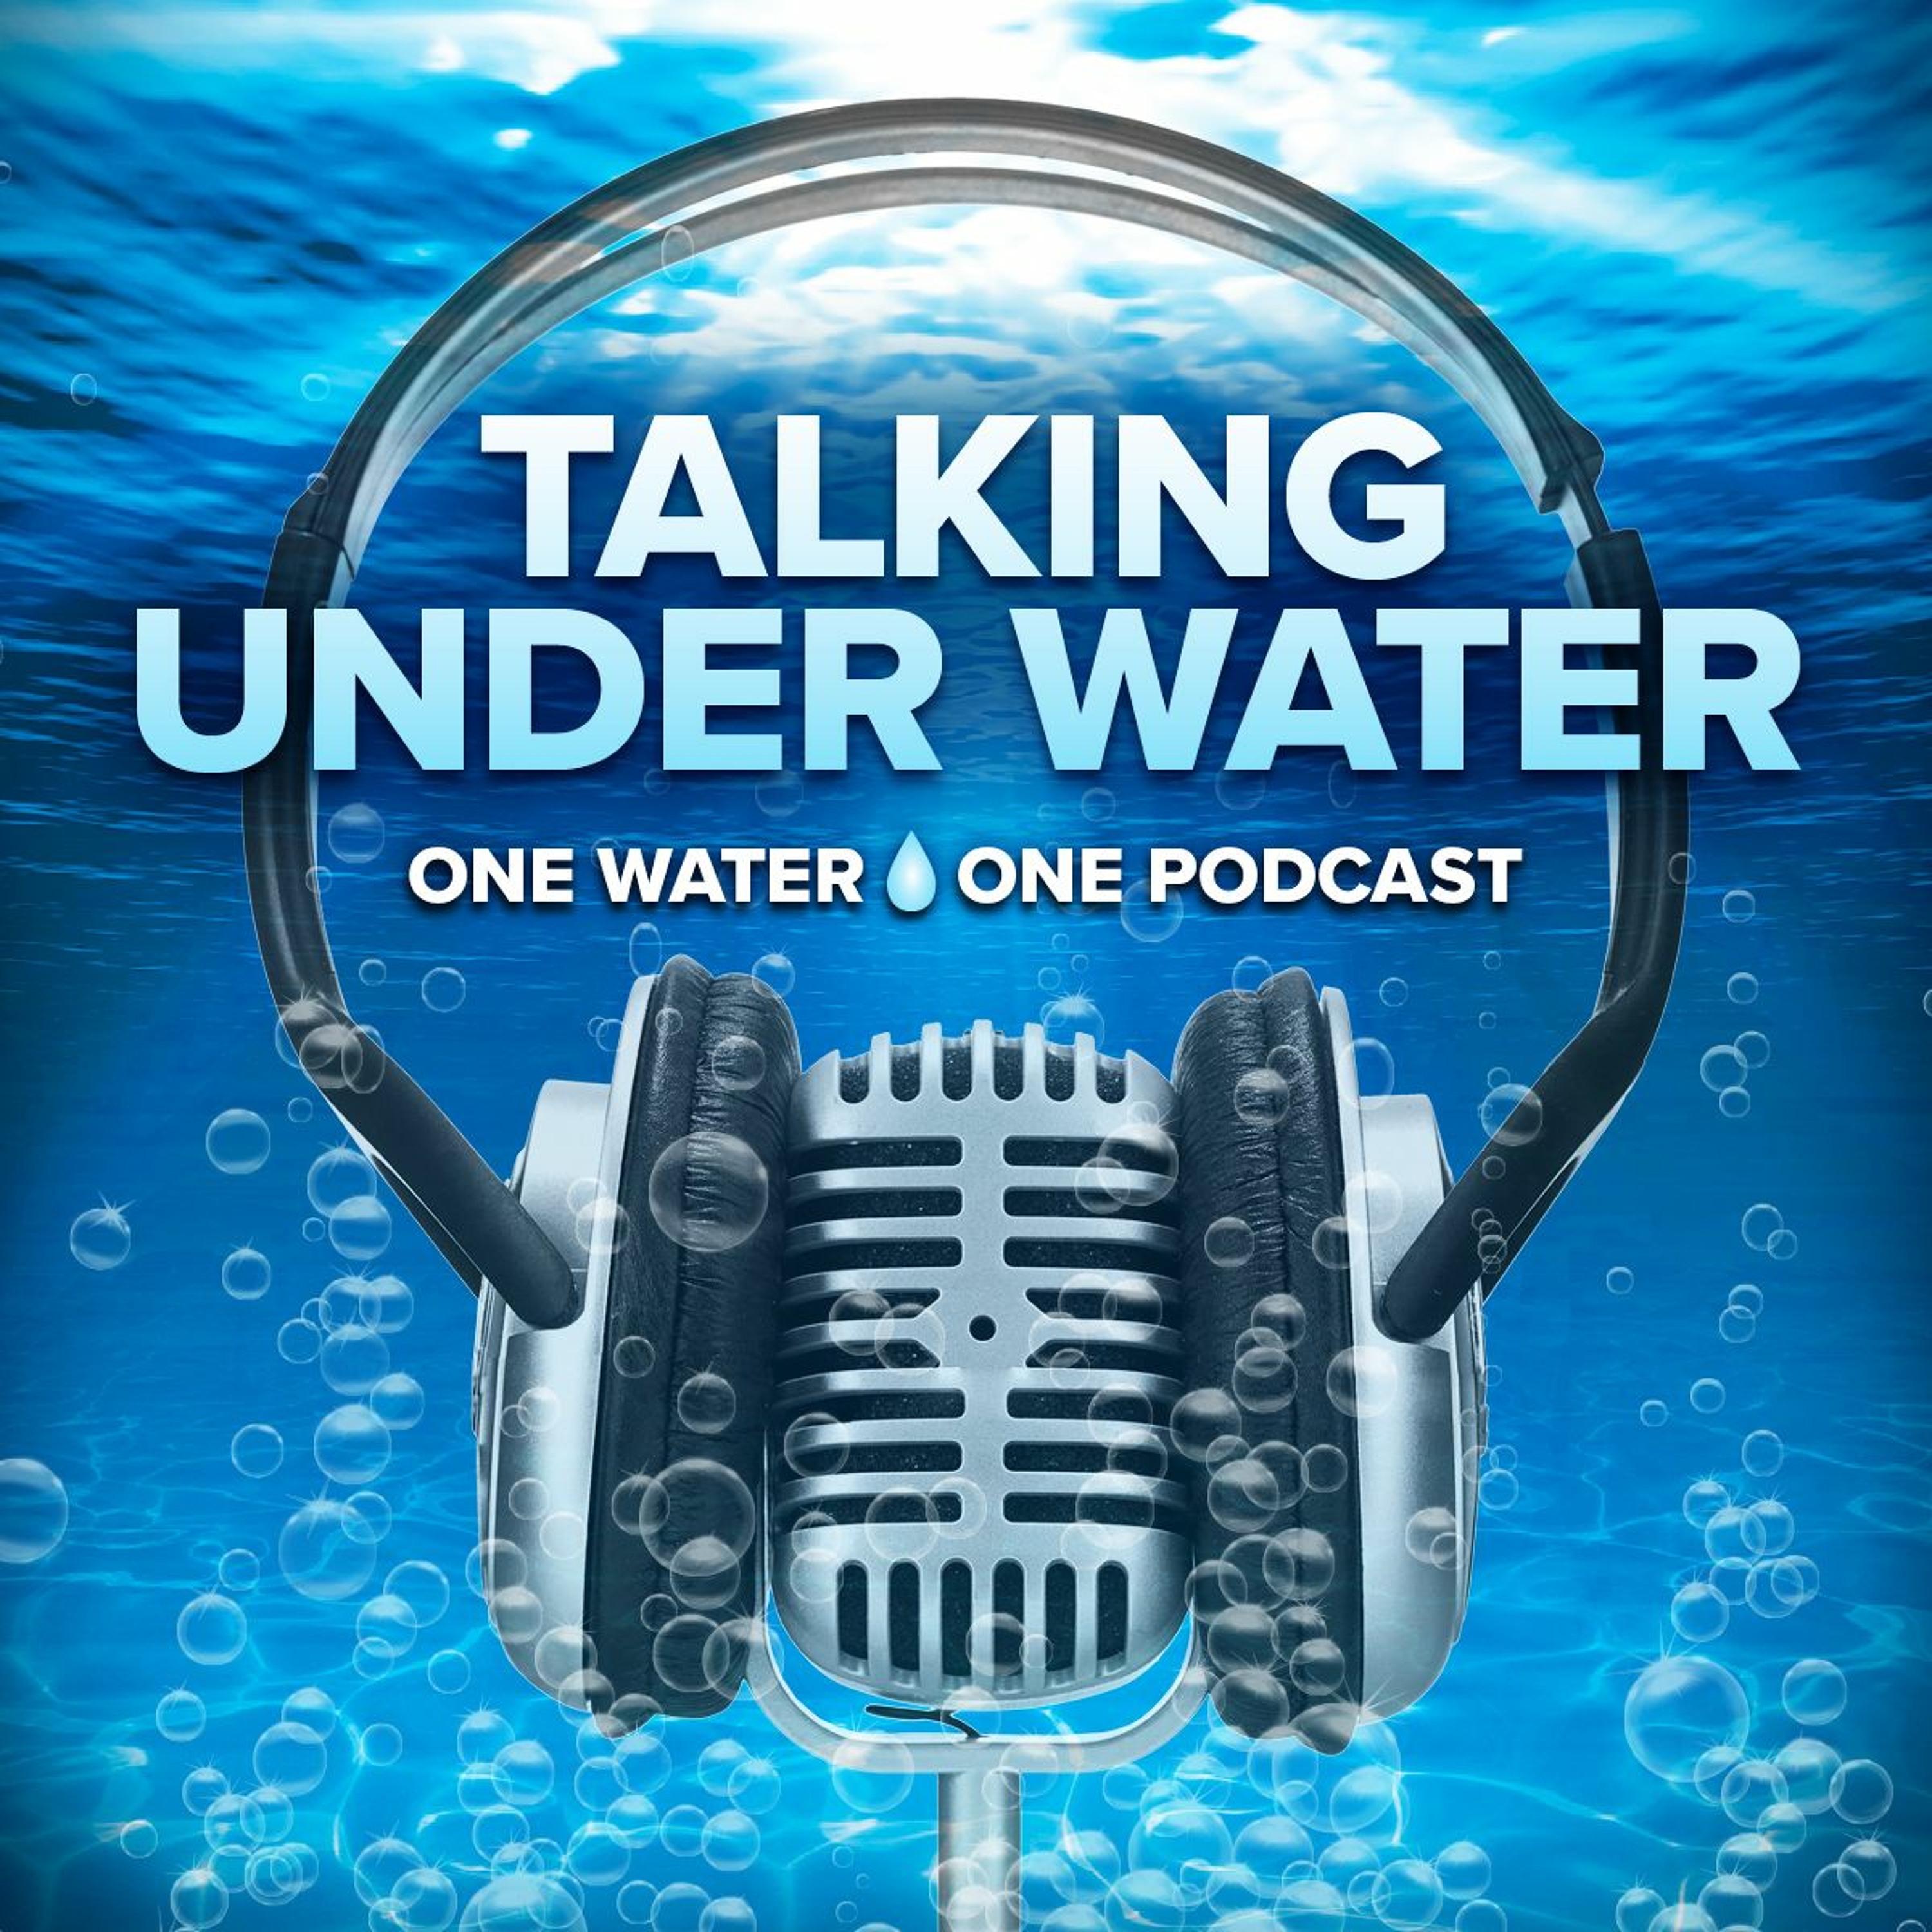 Episode 49: Diversity, Equity & Inclusion for the Water Sector